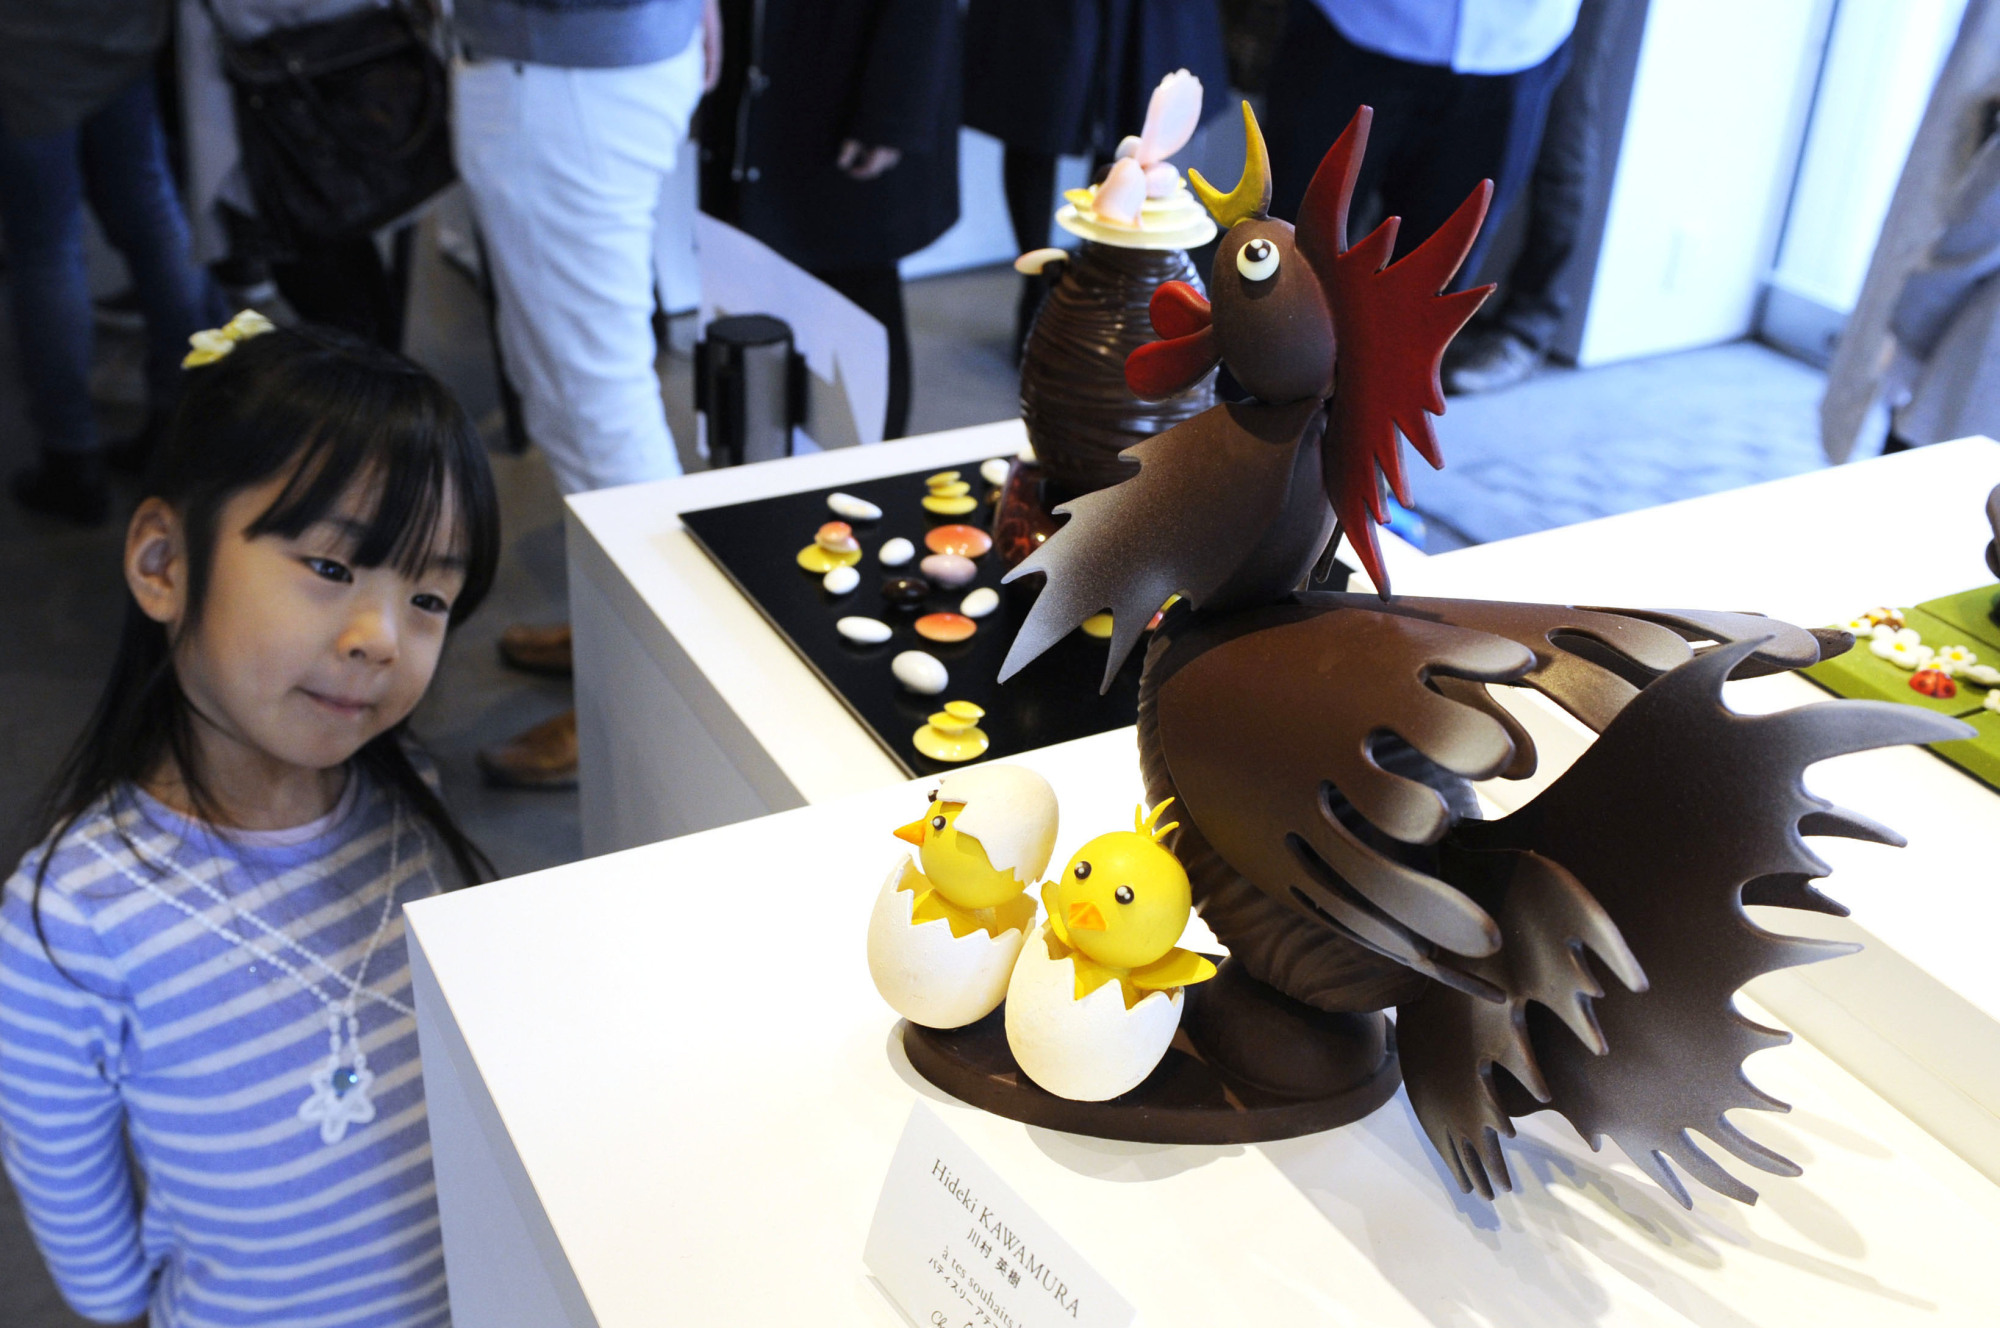 A young child looks at a chocolate cake during an Easter festival in Tokyo's Daikanyama neighborhood in March 2016. | KYODO